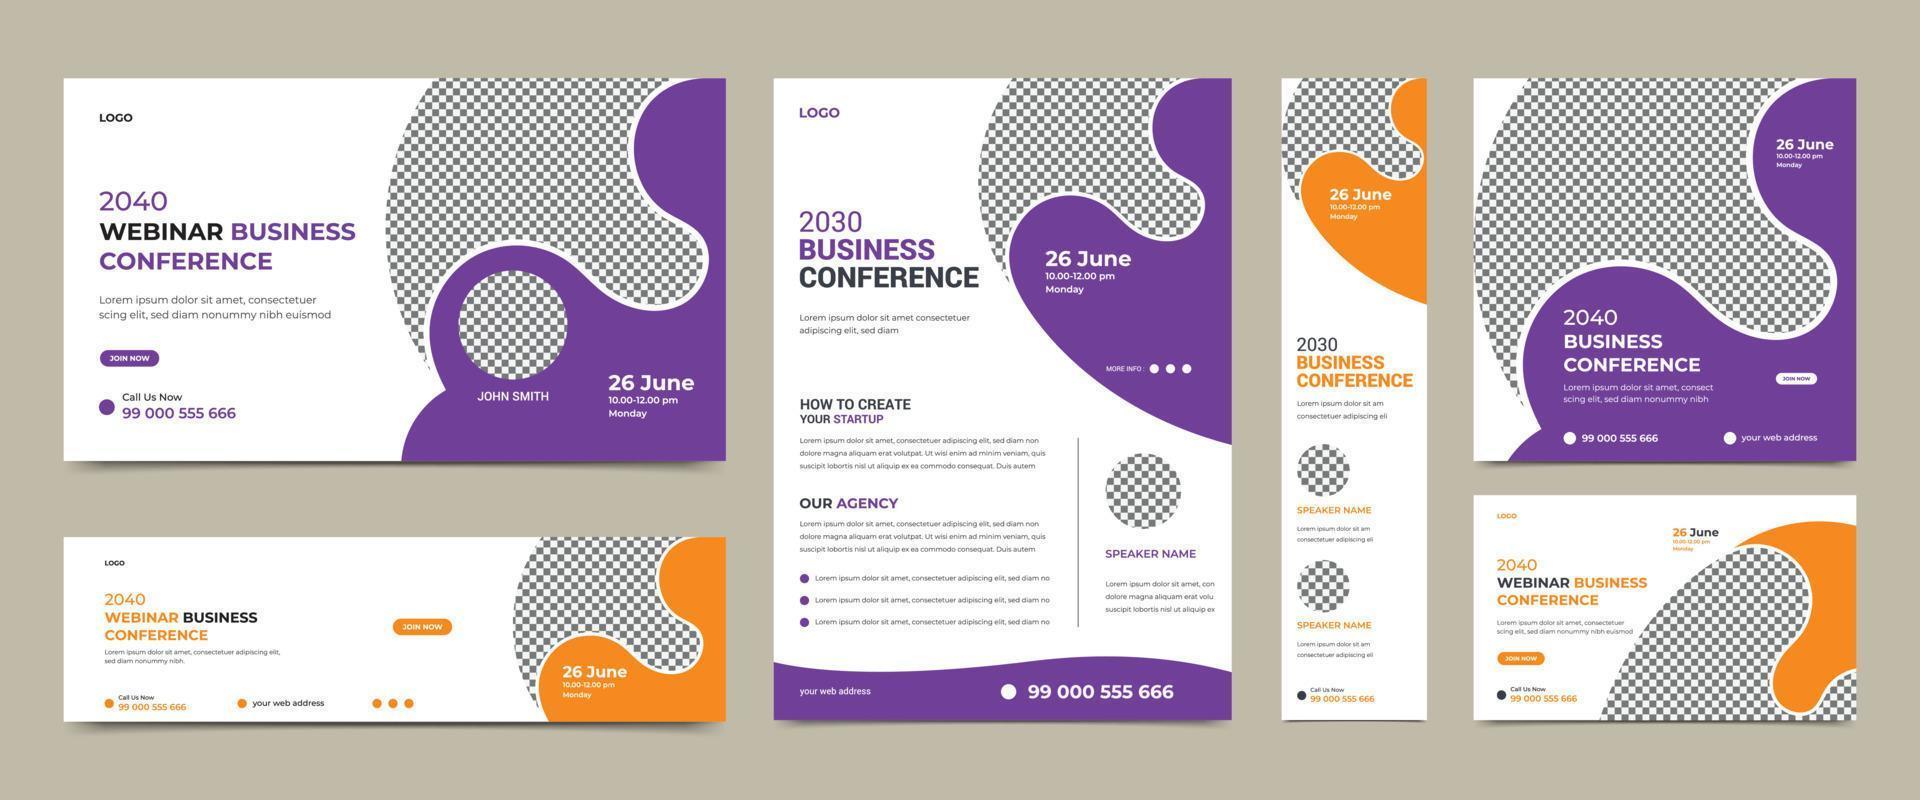 Webinar conference social media post banner design and conference invitation banner design template.. Usable for web banner and square banner, cover, conference flyer etc. vector